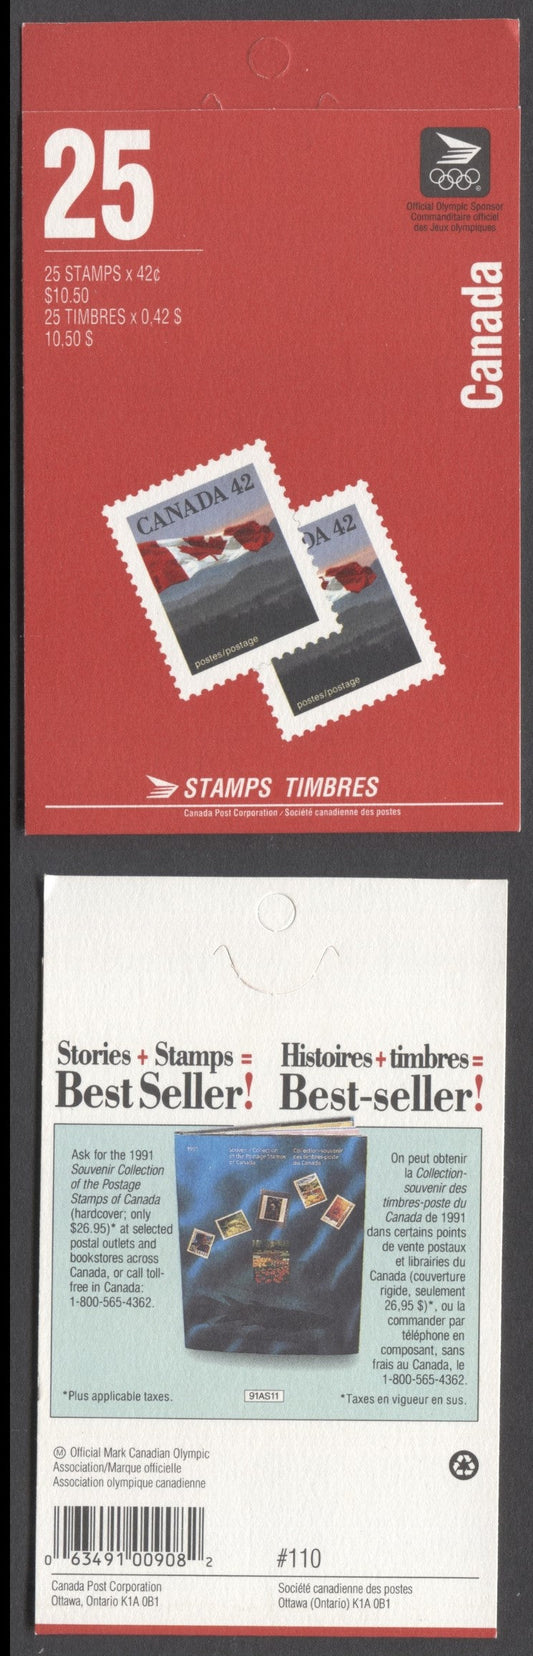 Lot 67 Canada #BK138Aa 1991-1992 Definitive Issue, A 42c Multicolored Booklet, Sealed, 2 Stamps + Olympic Logo' & 'Best Seller' Covers, AP Printing, Perf 13.6 x 13.1, Special Letter on Inside Back, Perforated Selvedge & Tag Bar Along Edges